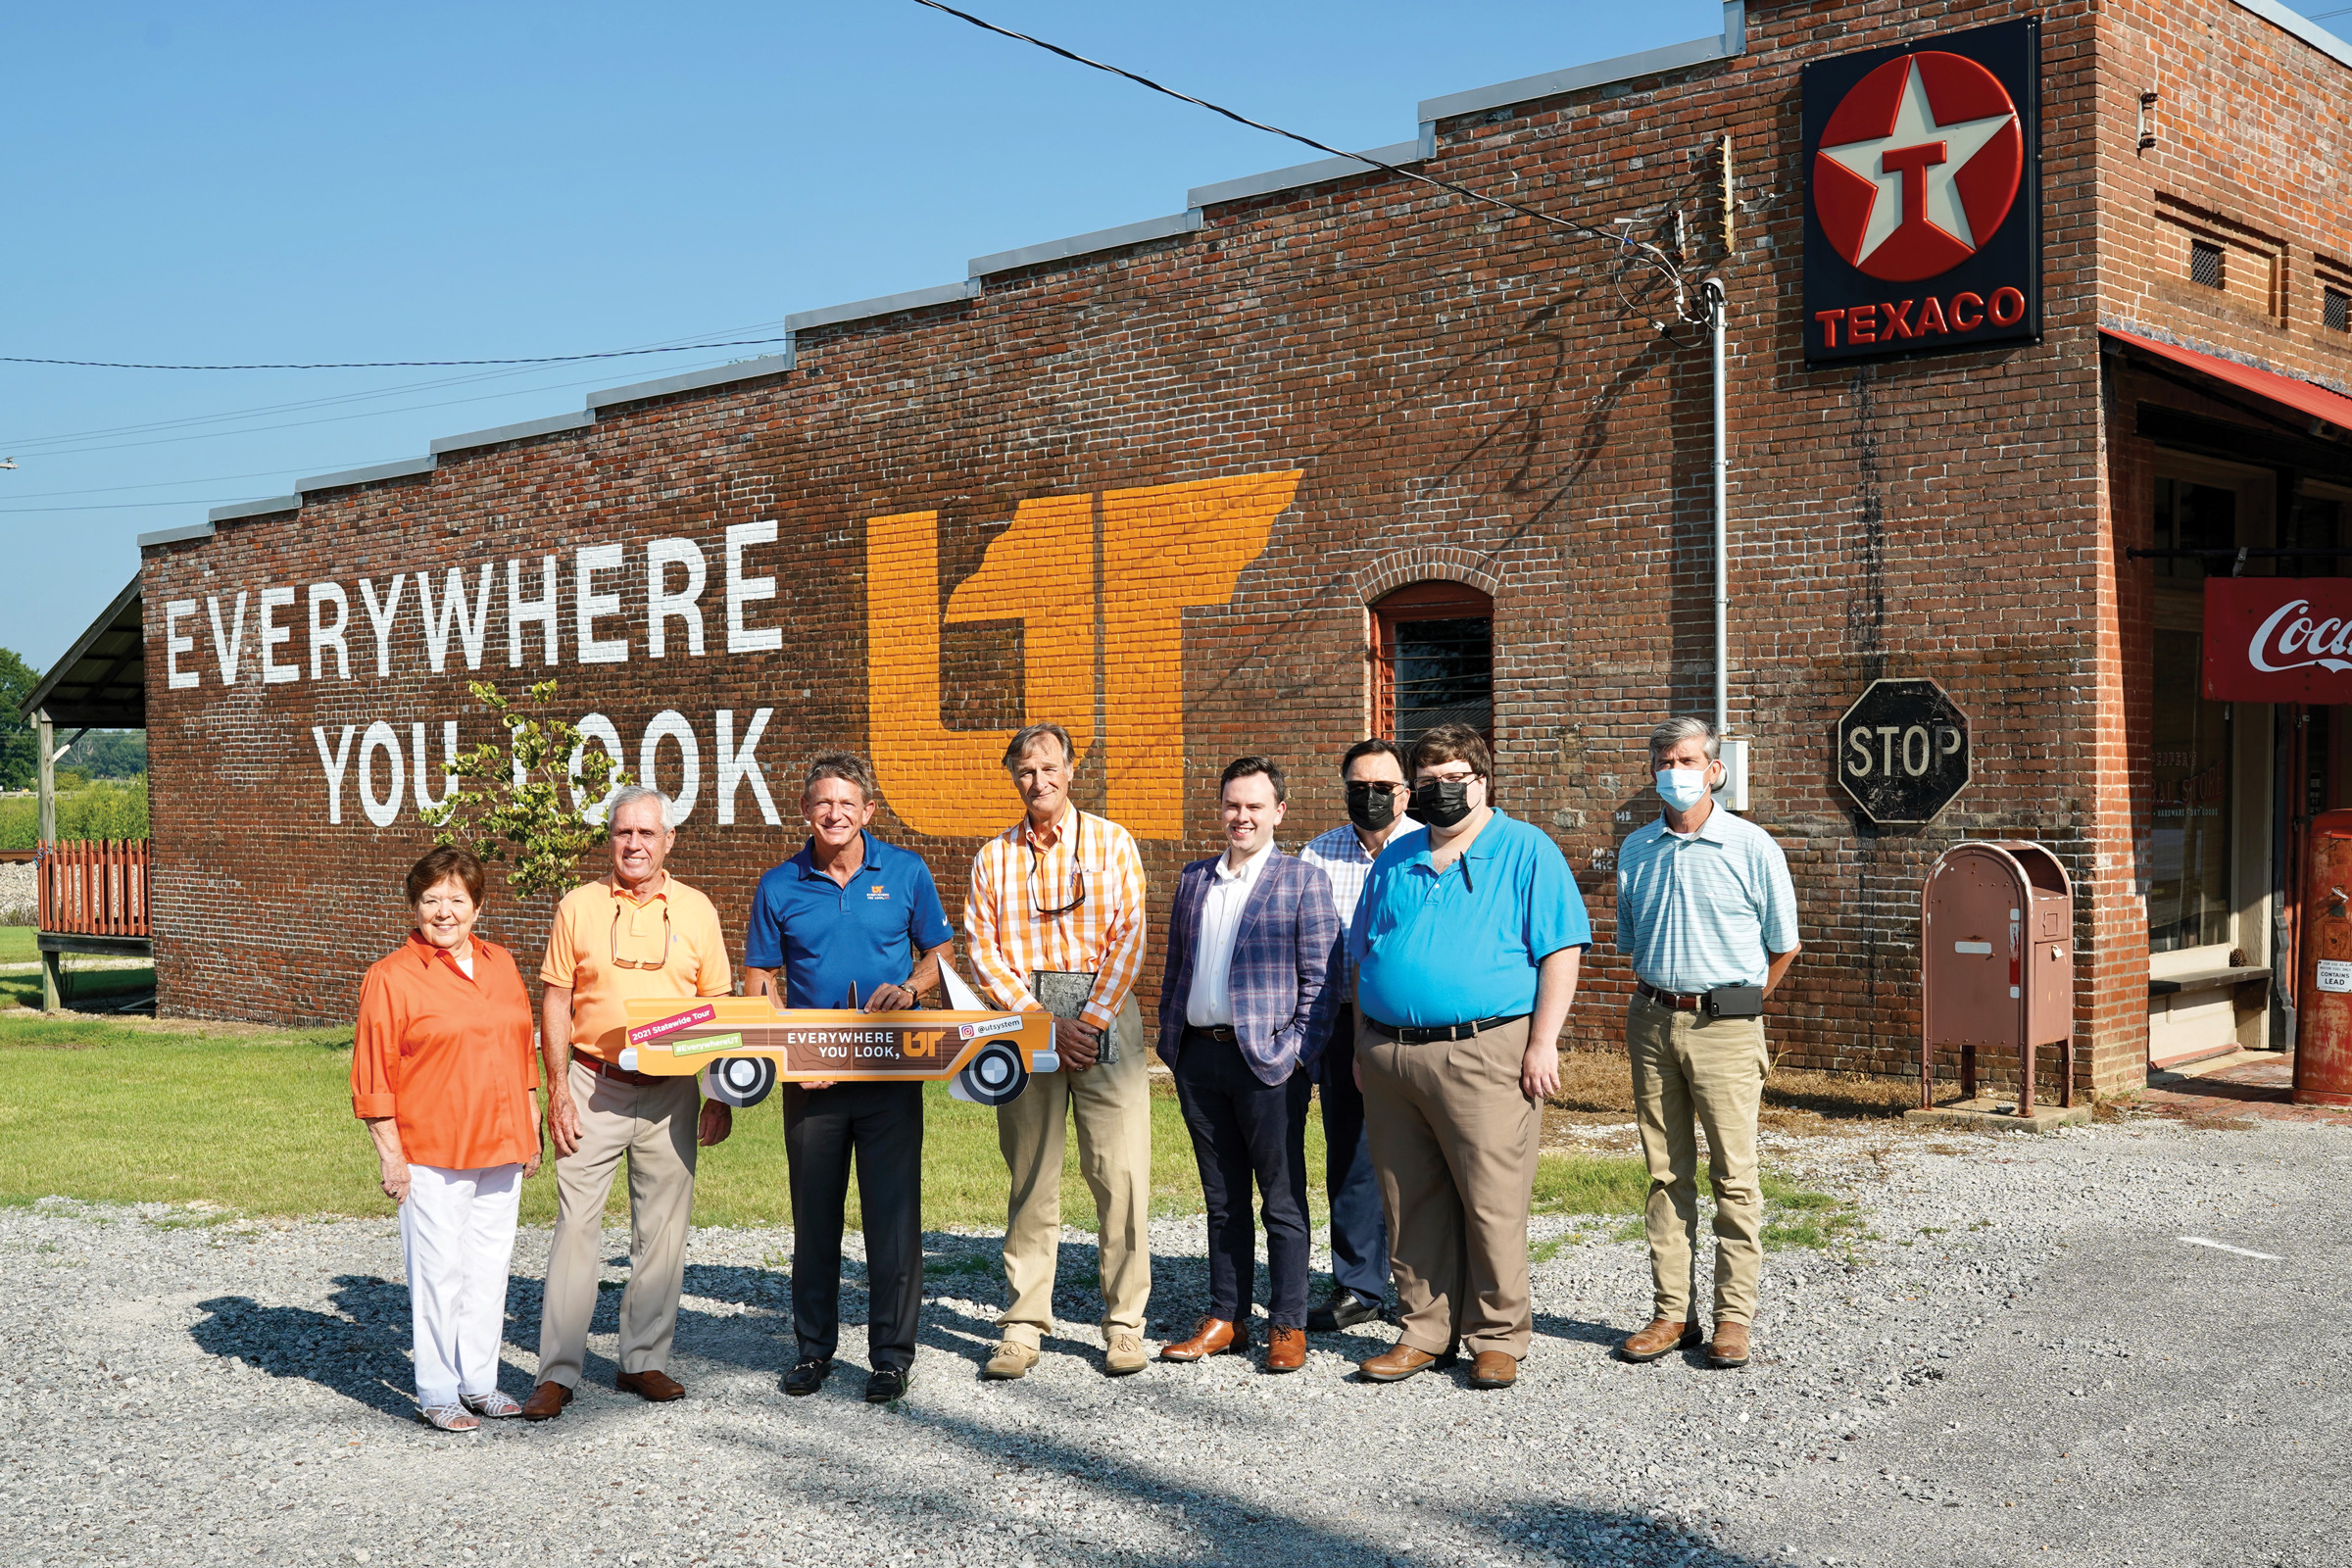 Randy Boyd and a group of locals in Fruitvale, Tennessee in front of the Everywhere You Look mural